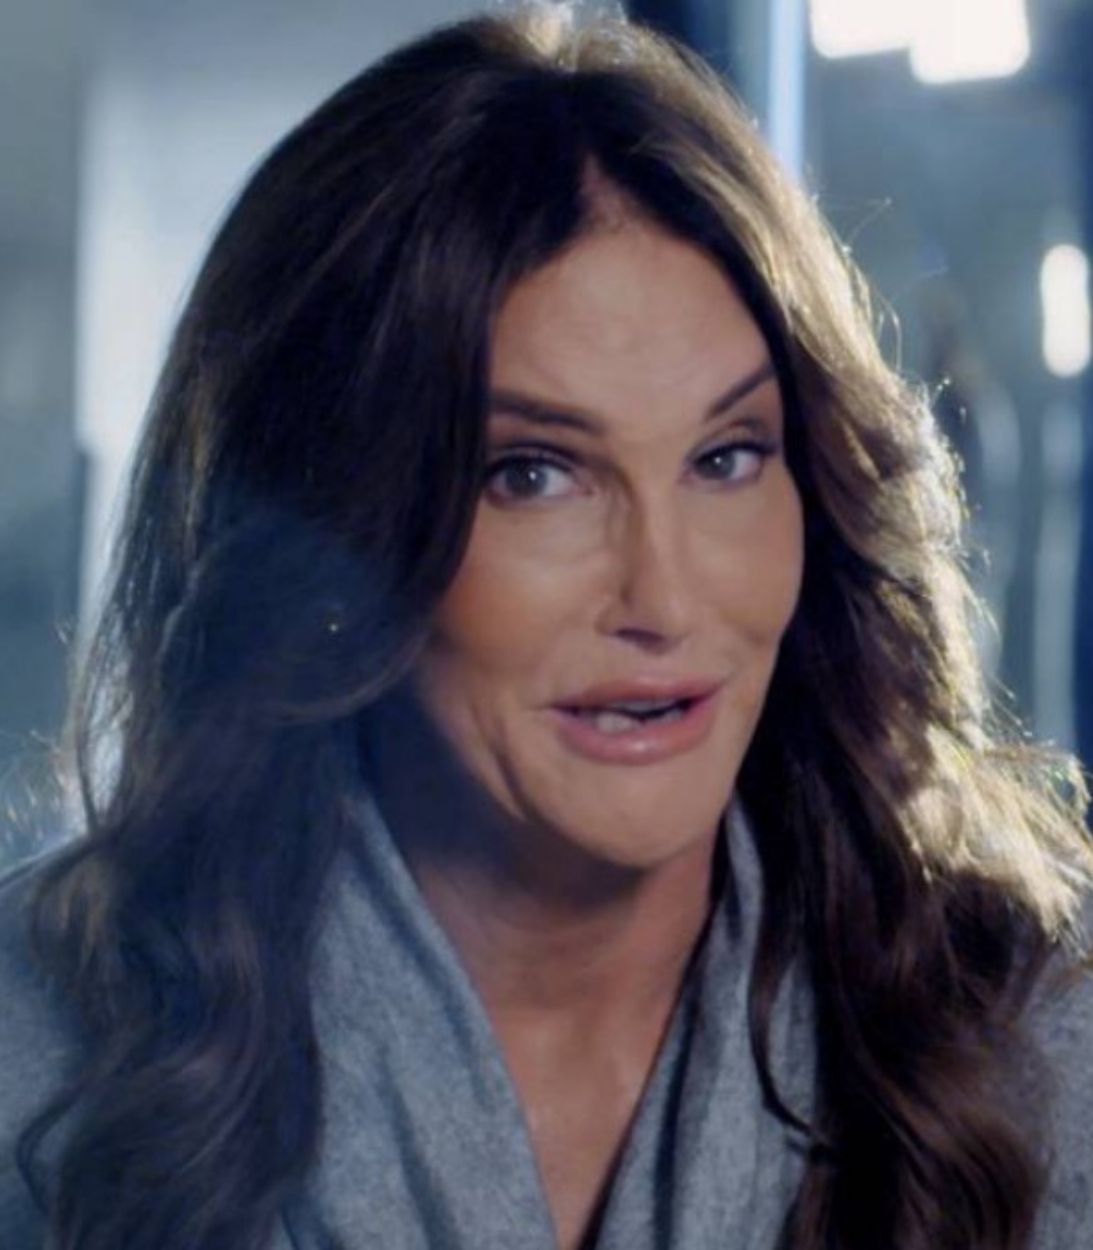 Caitlyn Jenner Thompson in Keeping Up With The Kardashians